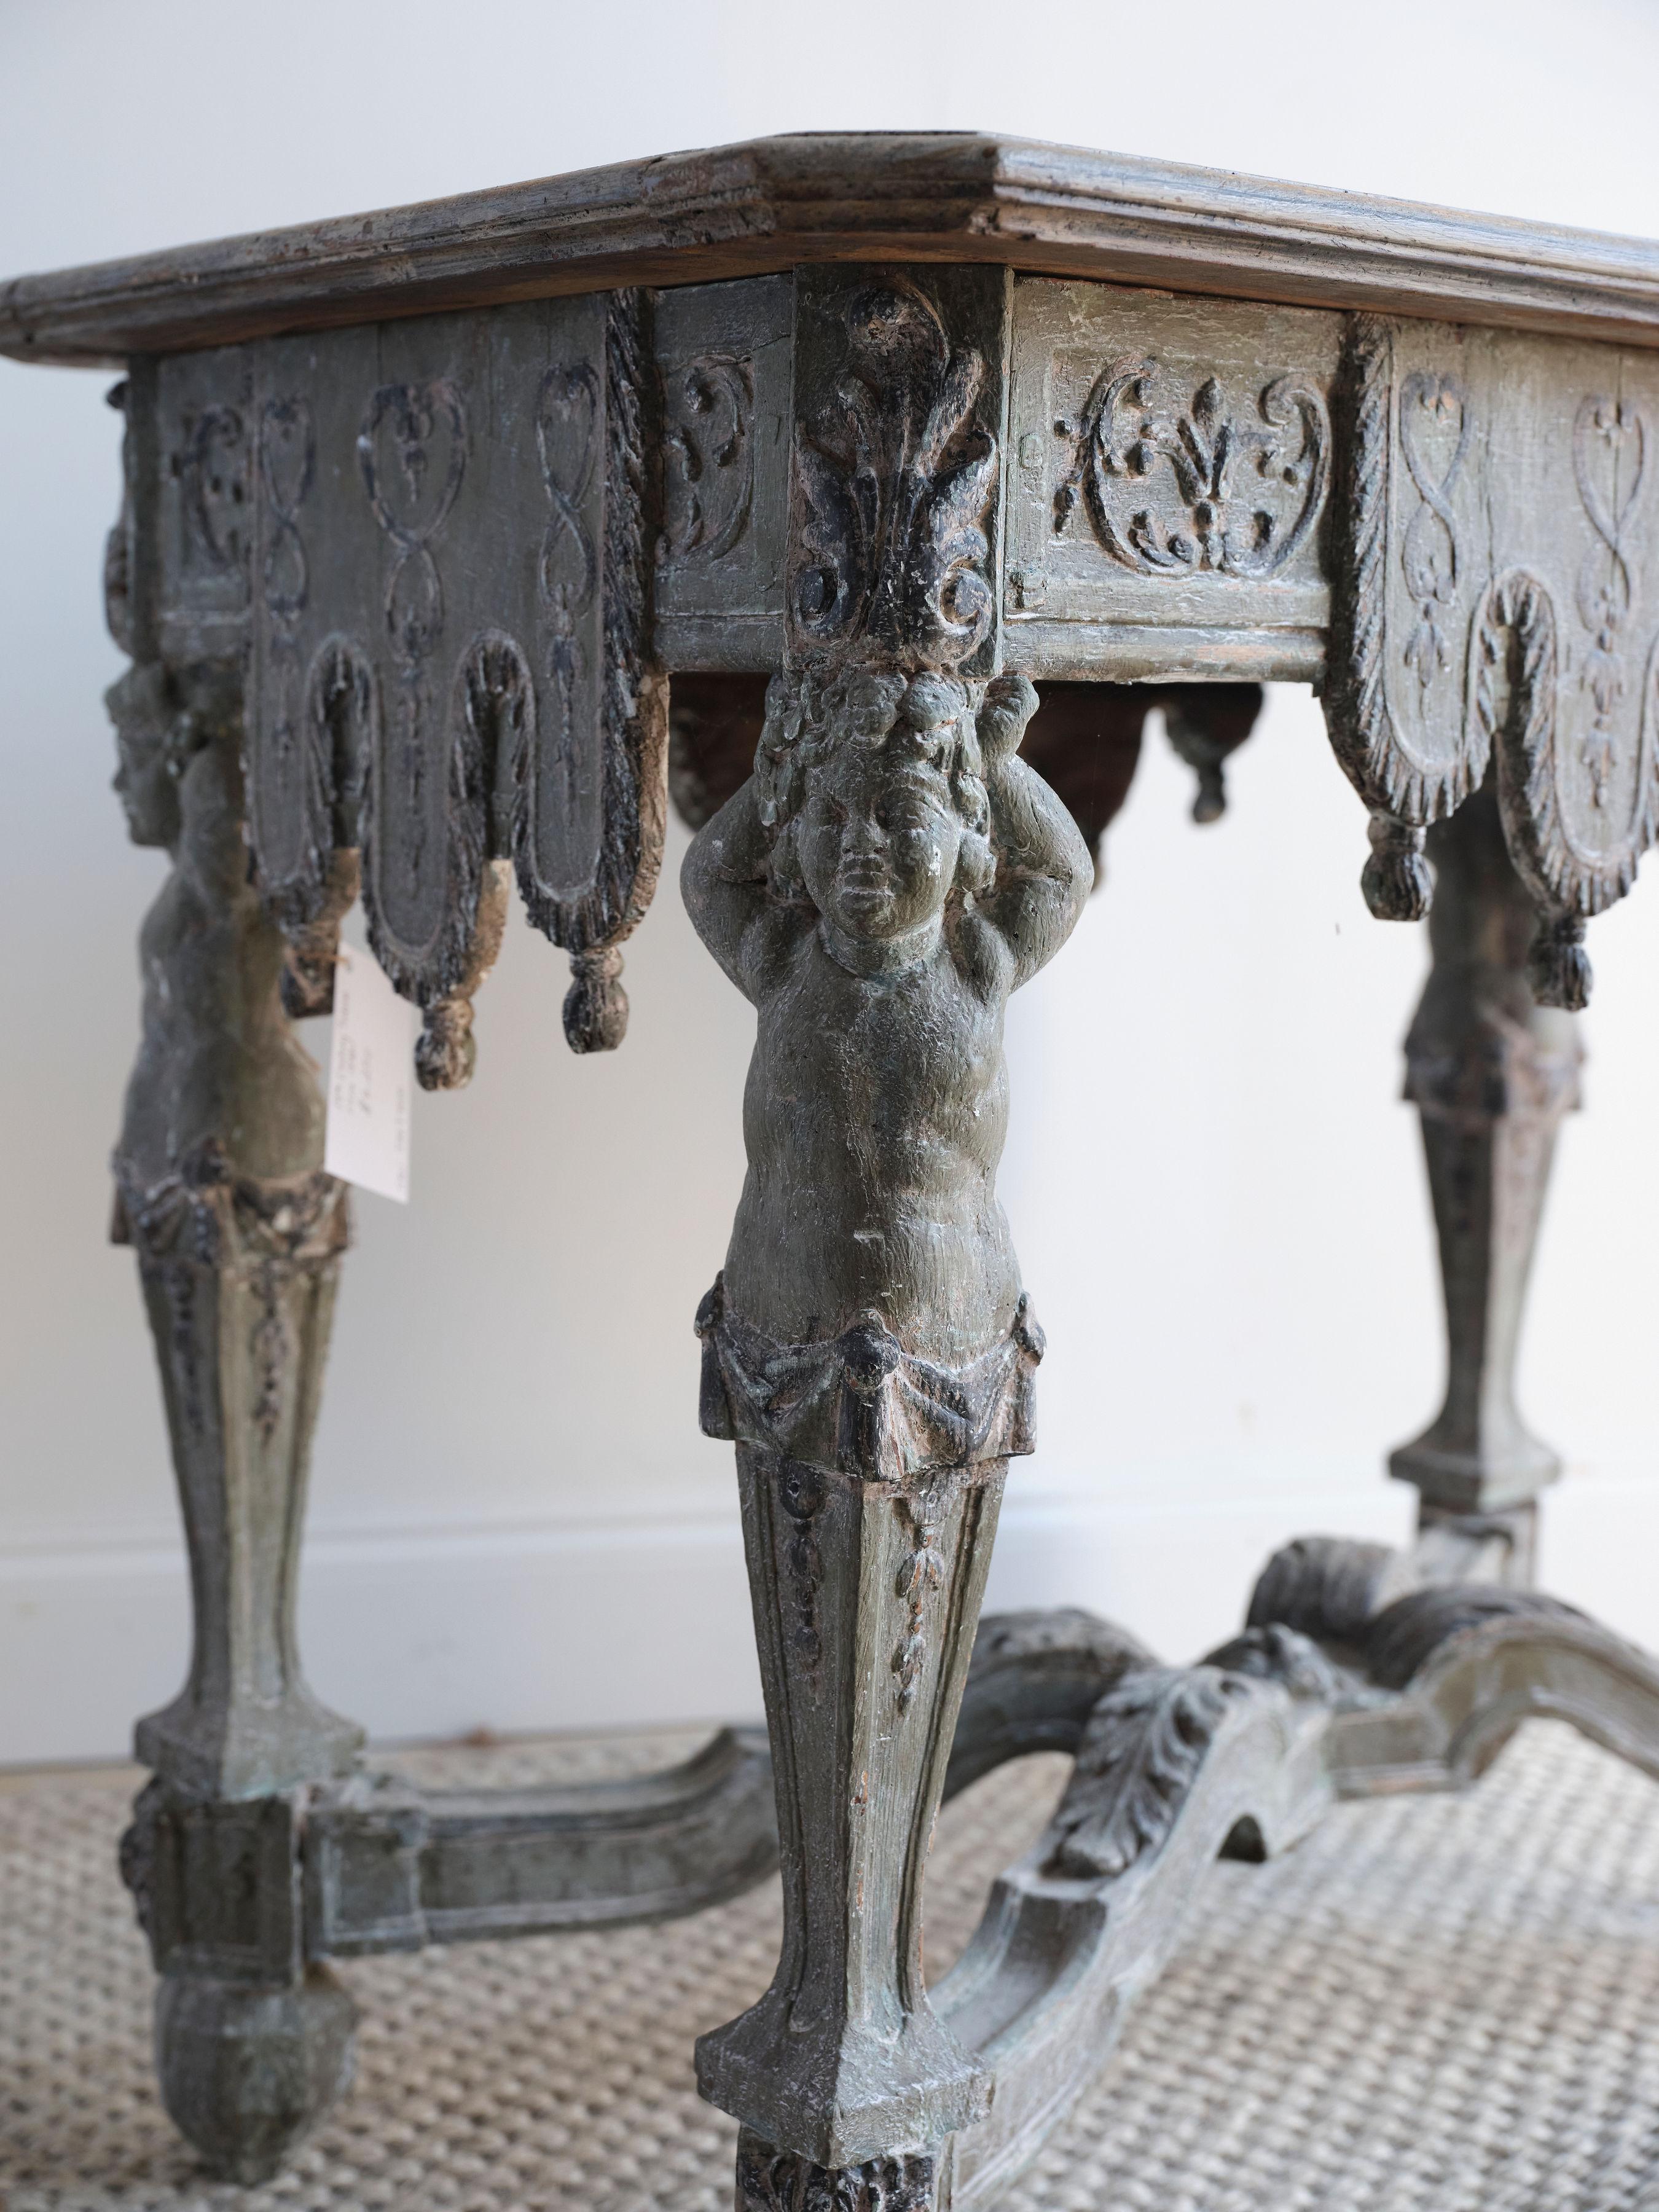 This stunning Renaissance style console table has so many unique wood carved details. It is truly one of a kind. Each leg of the table features the carving of a young child carrying the table base on its head. The table was created with pinewood and